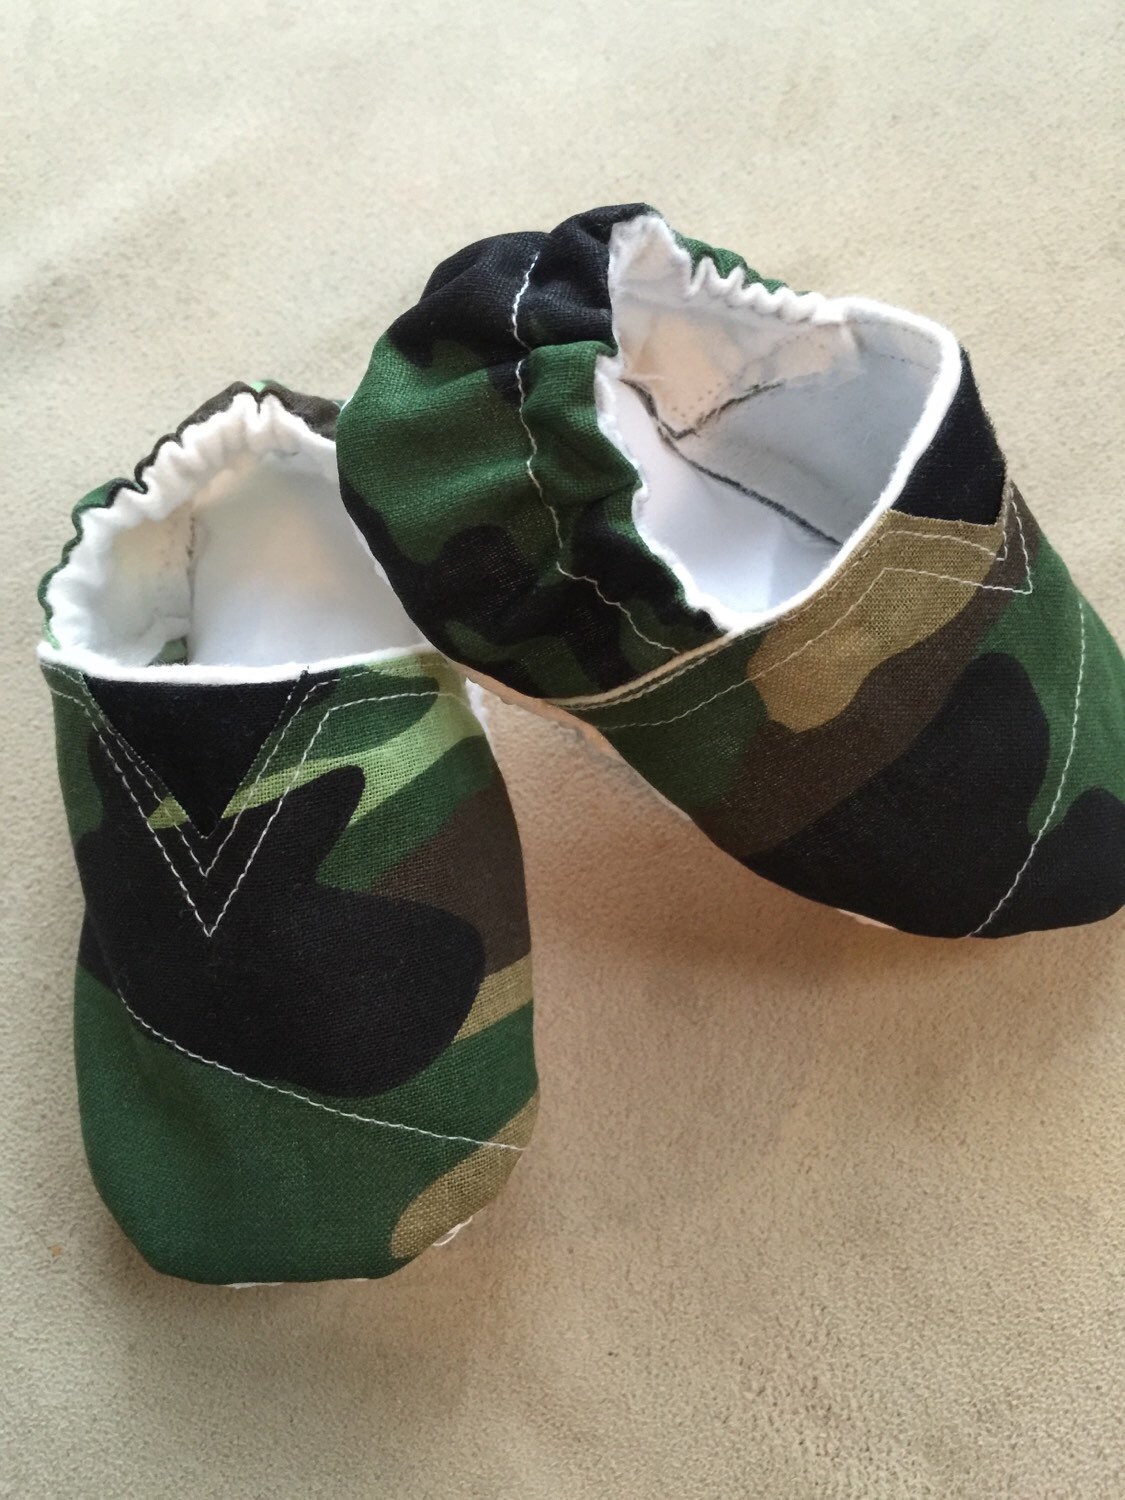 Camo baby toms inspired shoes infant crib shoes by BabyBrays